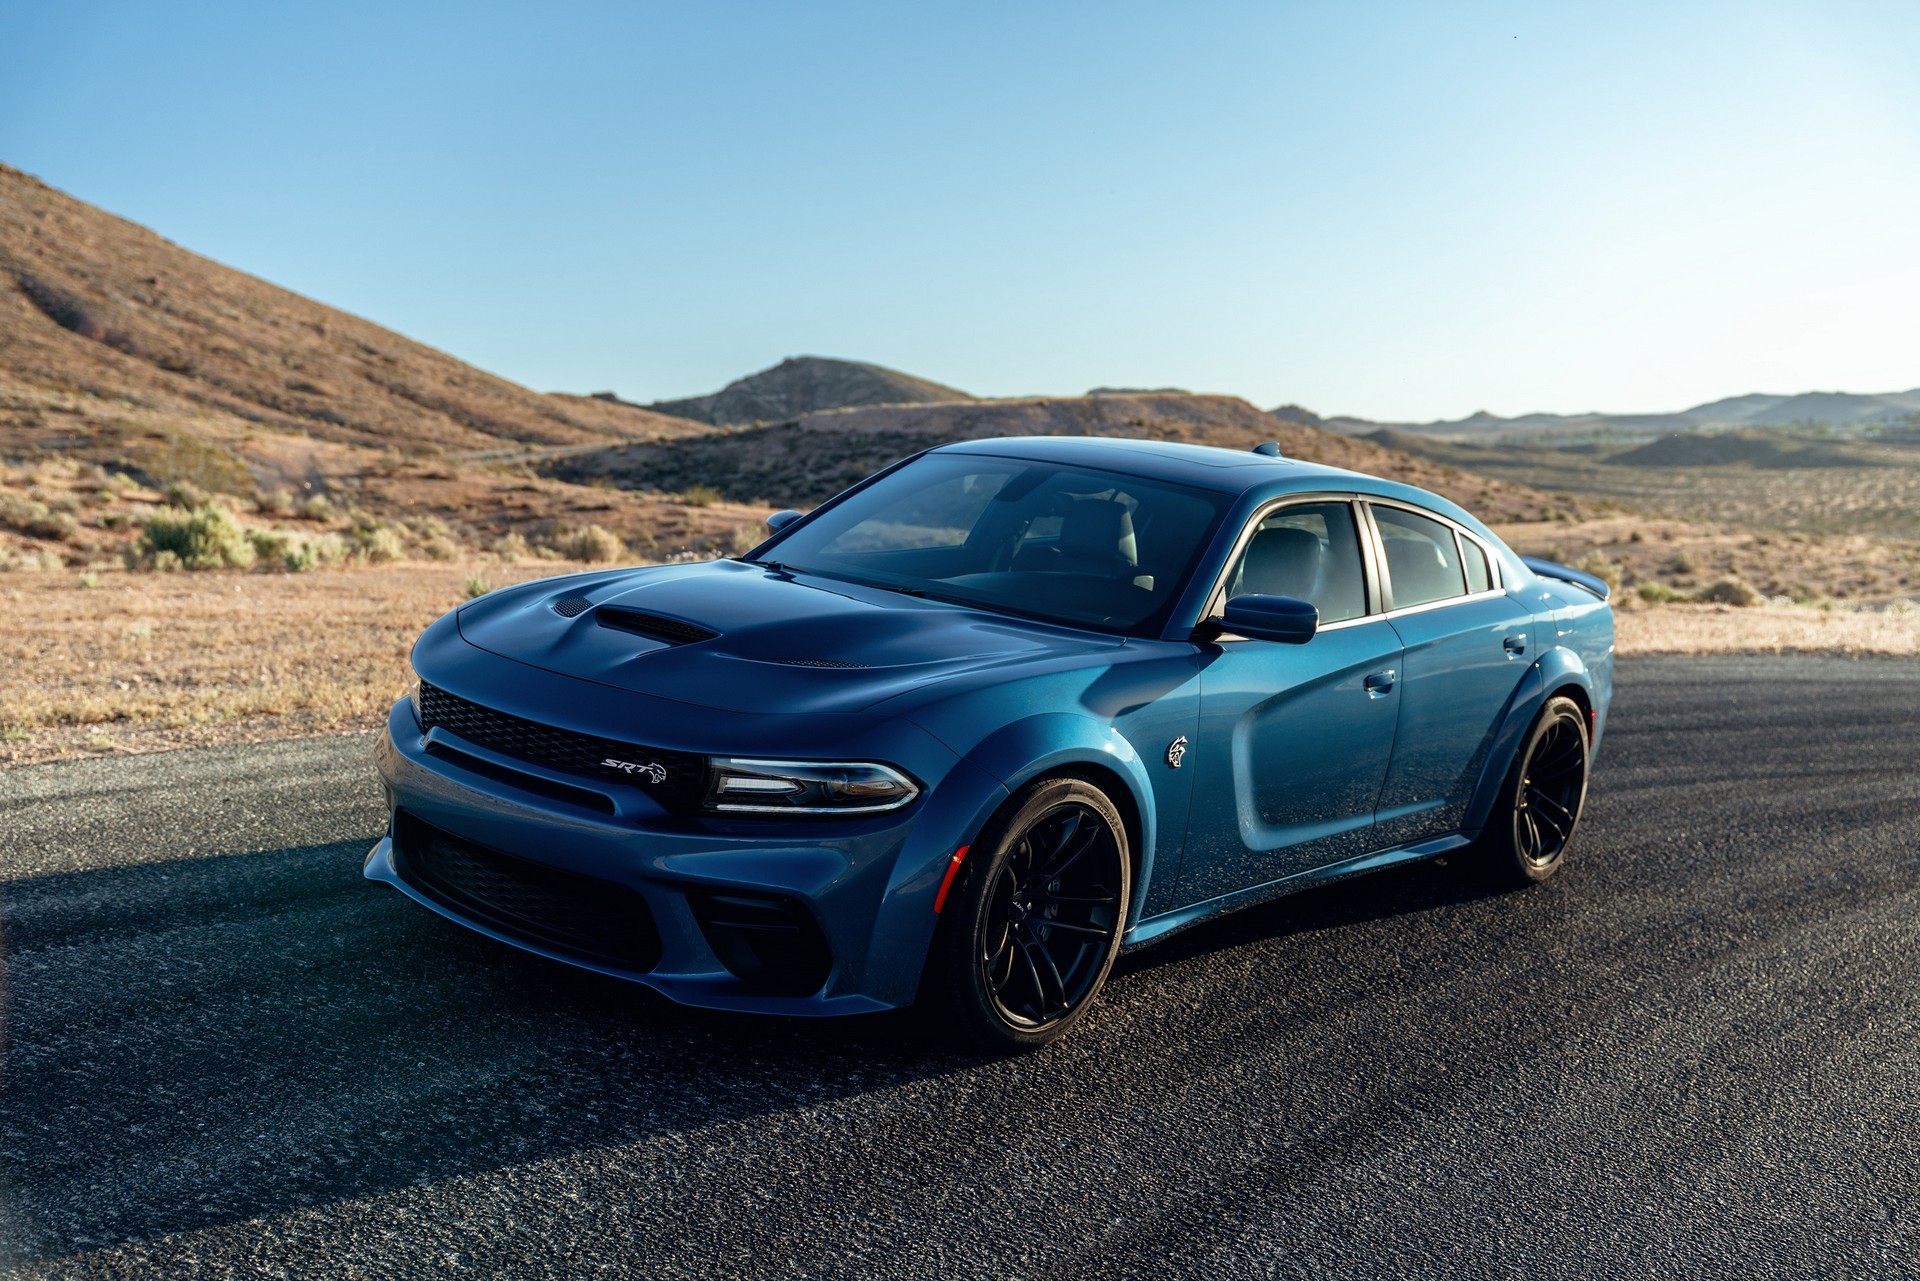 Dodge Confirms Electrified Future For the Charger, Challenger